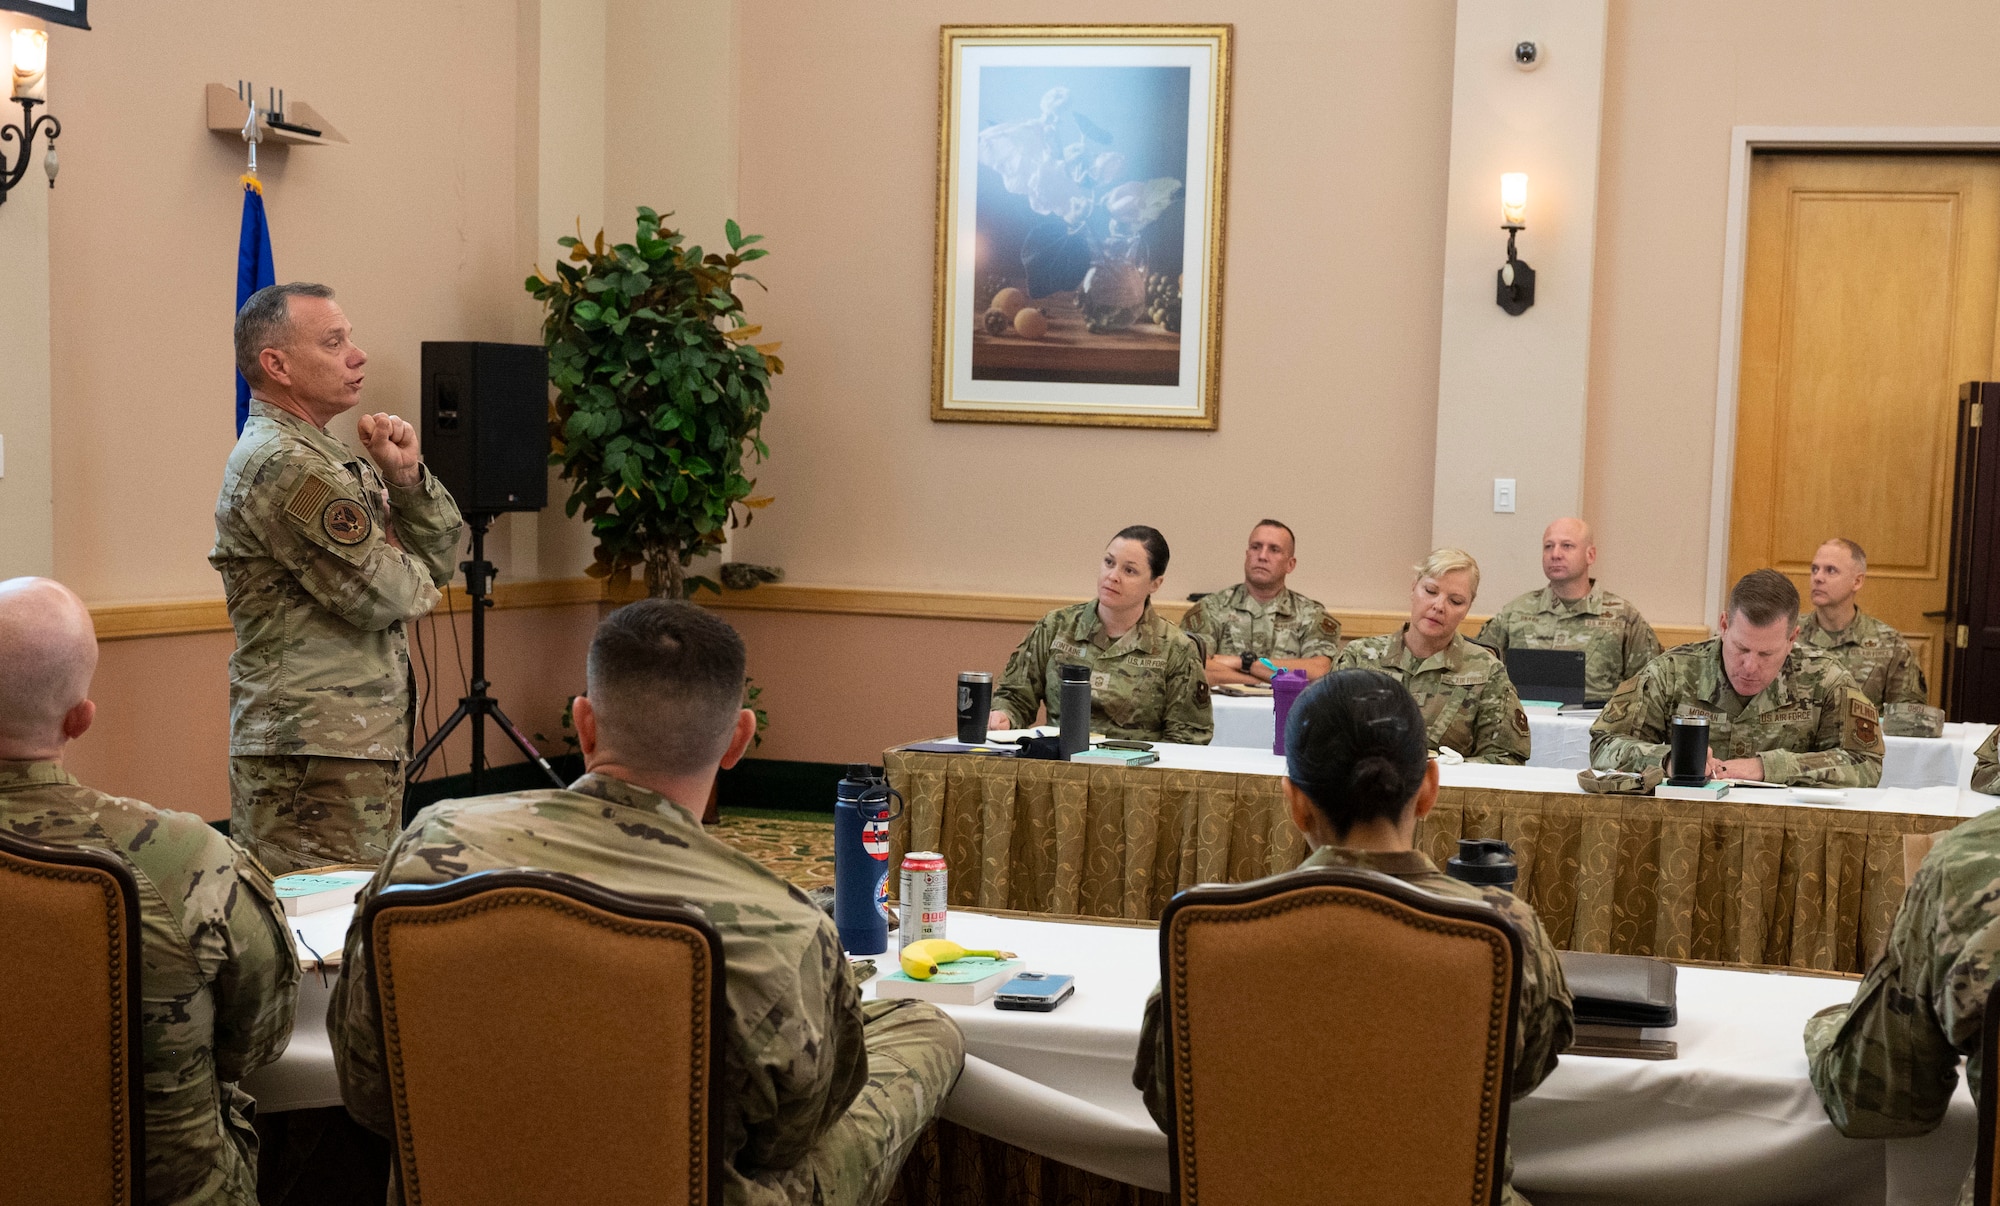 U.S. Air Force Chief Master Sgt. Erik Thompson, command chief of Air Education and Training Command, gives a briefing to command chiefs during AETC's Gathering of the Torch at Joint Base San Antonio-Lackland, Texas, Nov. 7, 2022